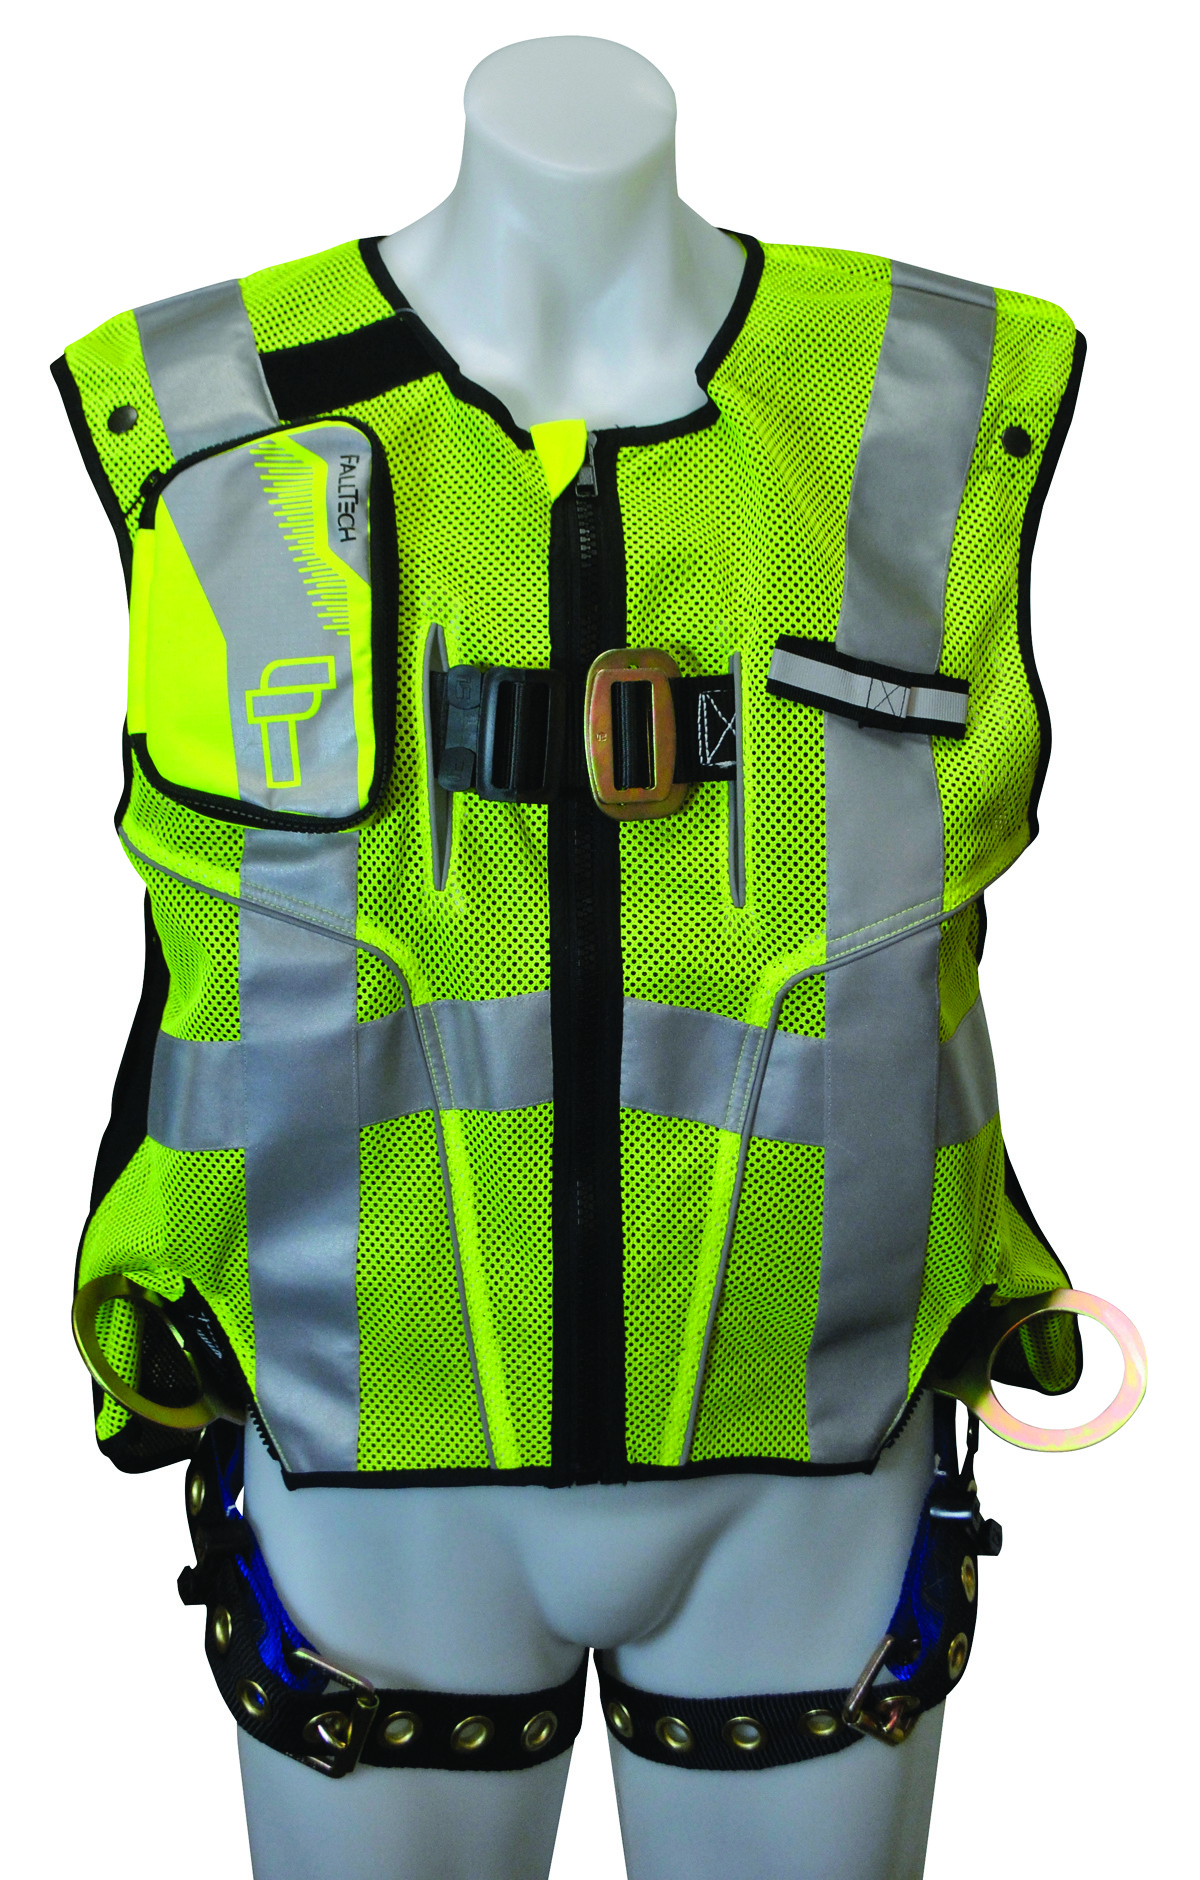 FallTech 7018SML High-Vis Vest Harness from Columbia Safety